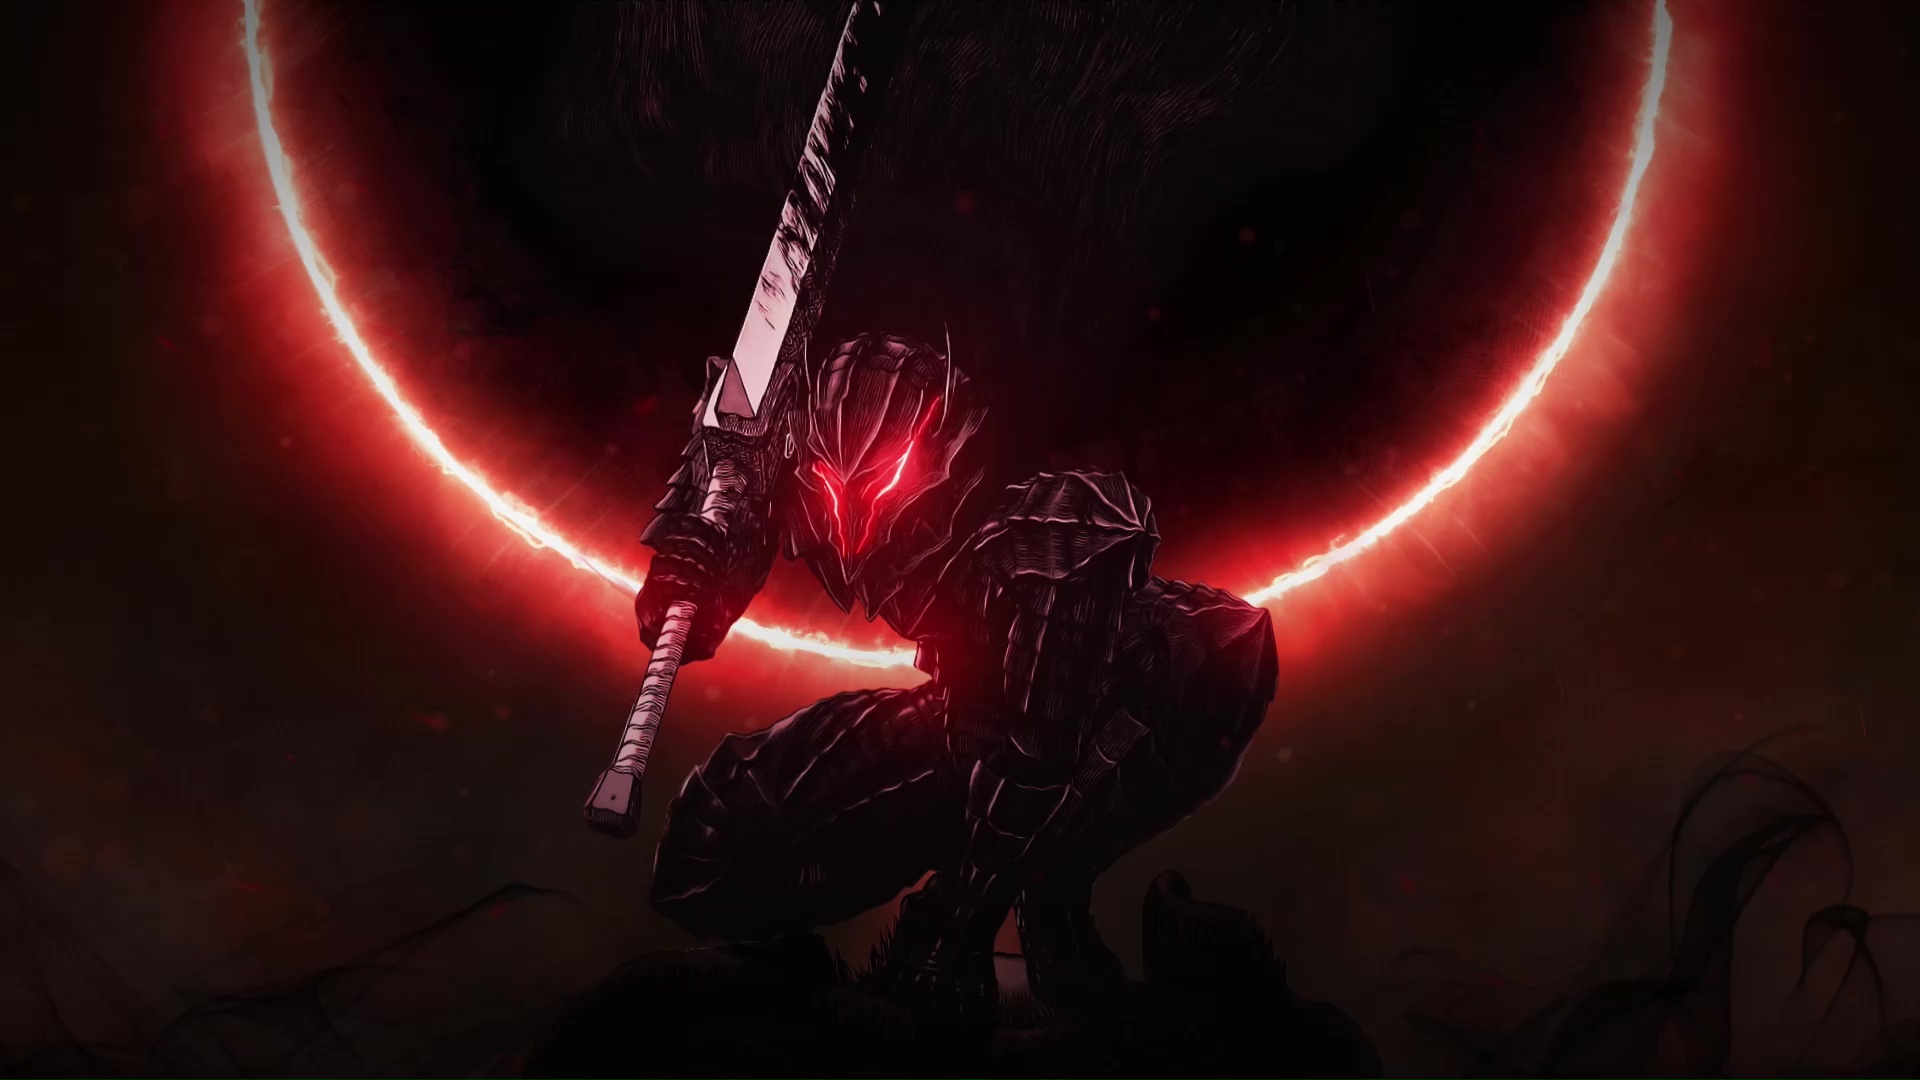 What Makes the Eclipse So Visceral? (Berserk) - YouTube